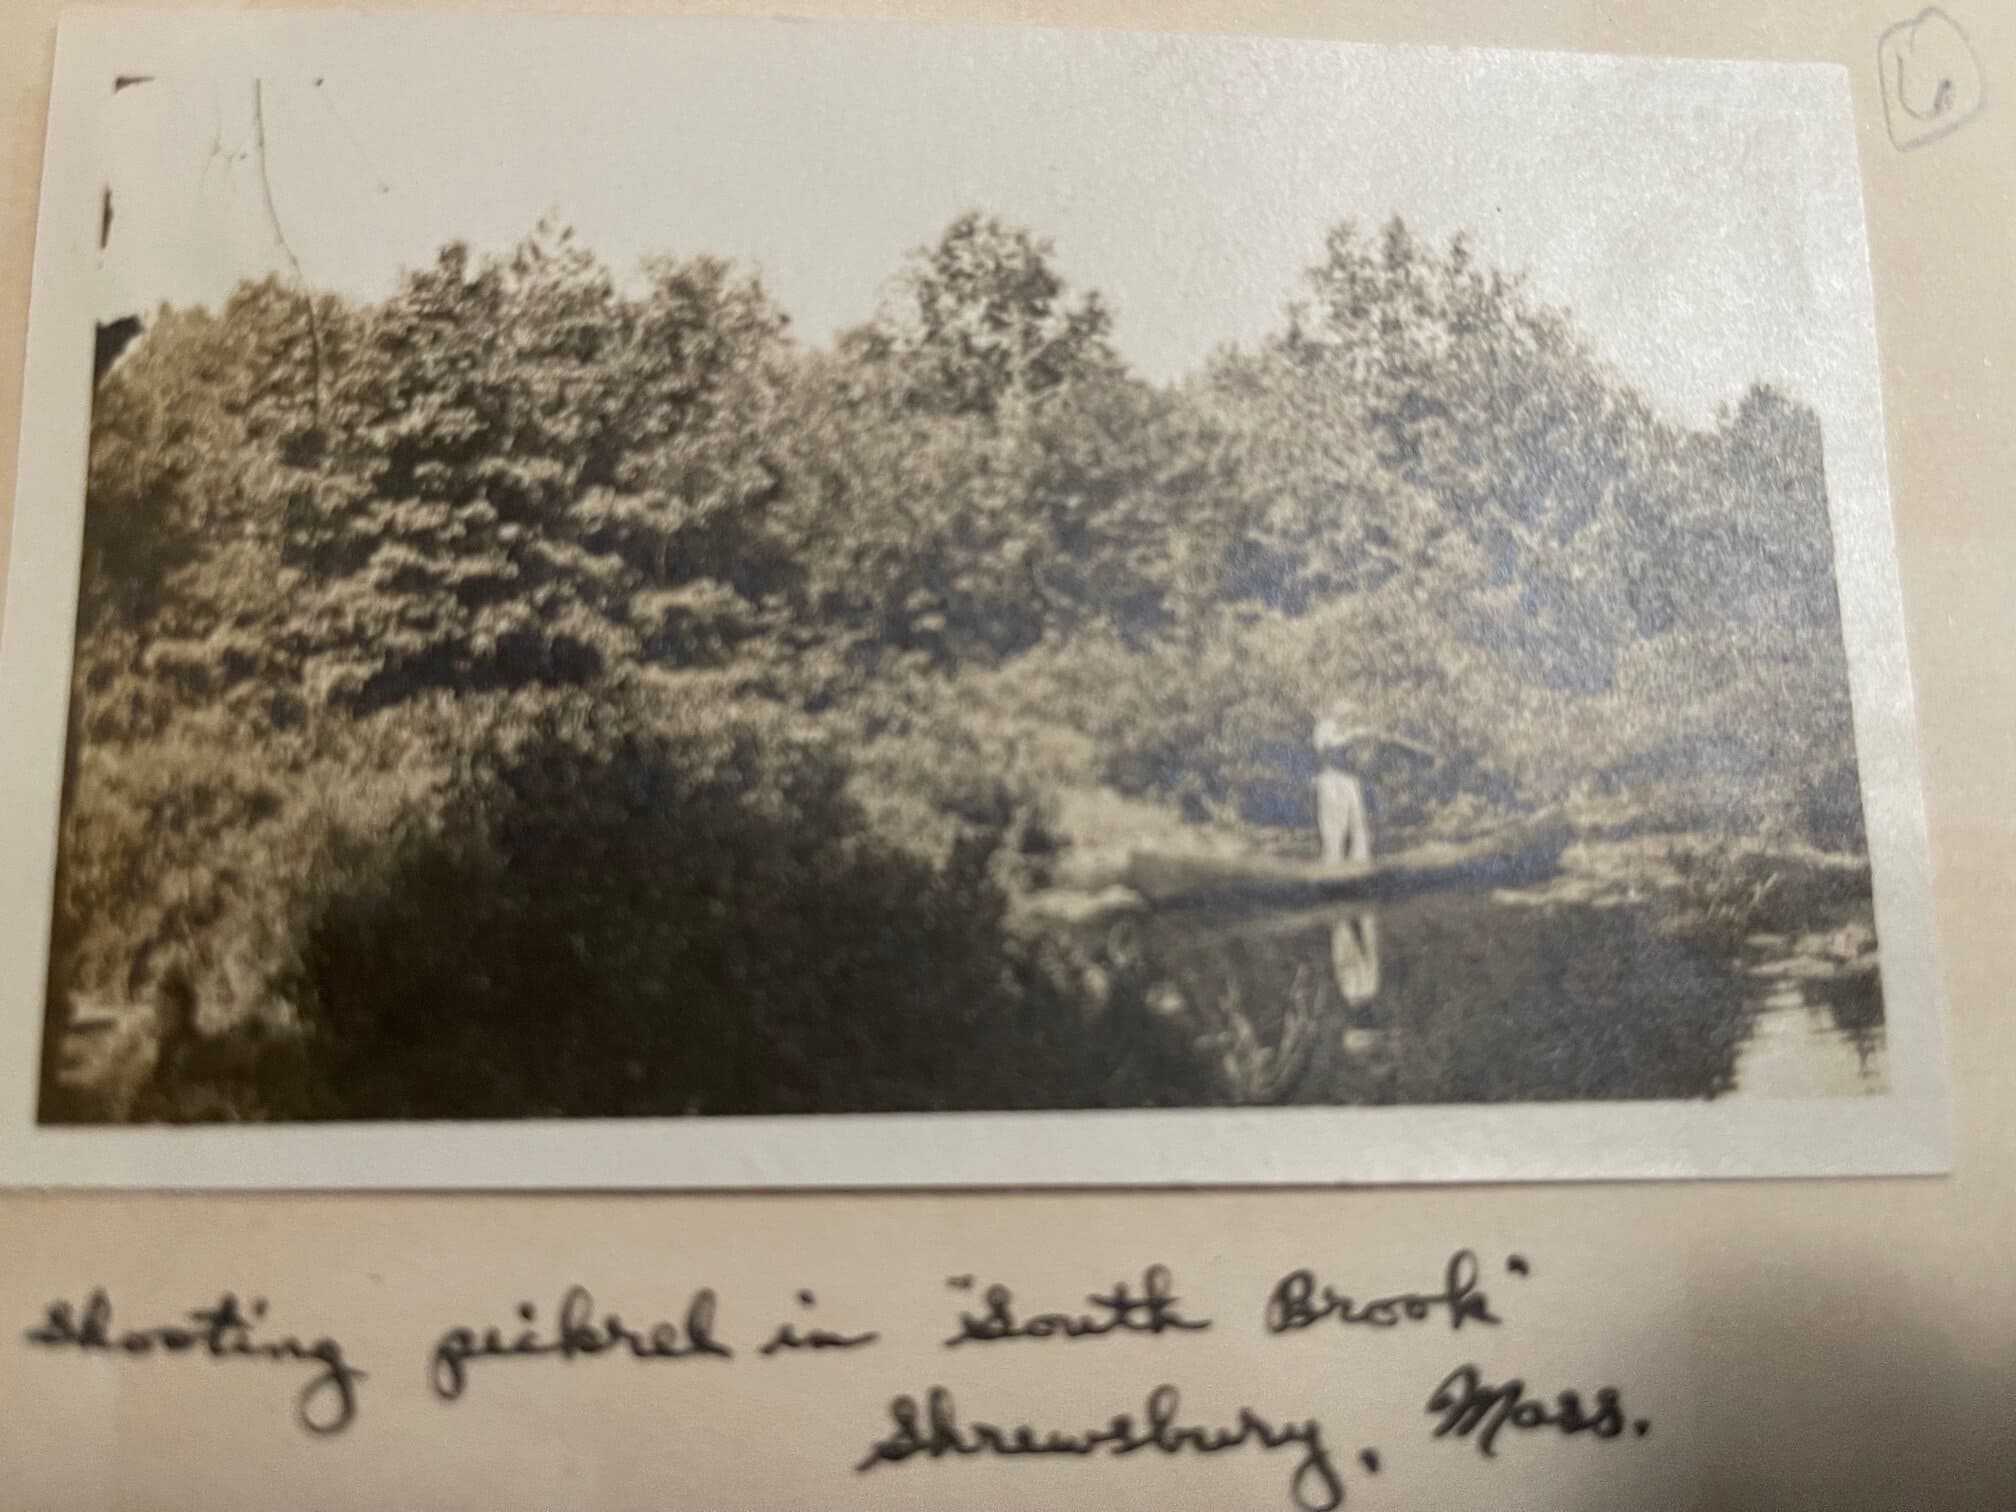 A century ago in Shrewsbury, some outdoor pursuits were far less placid than today